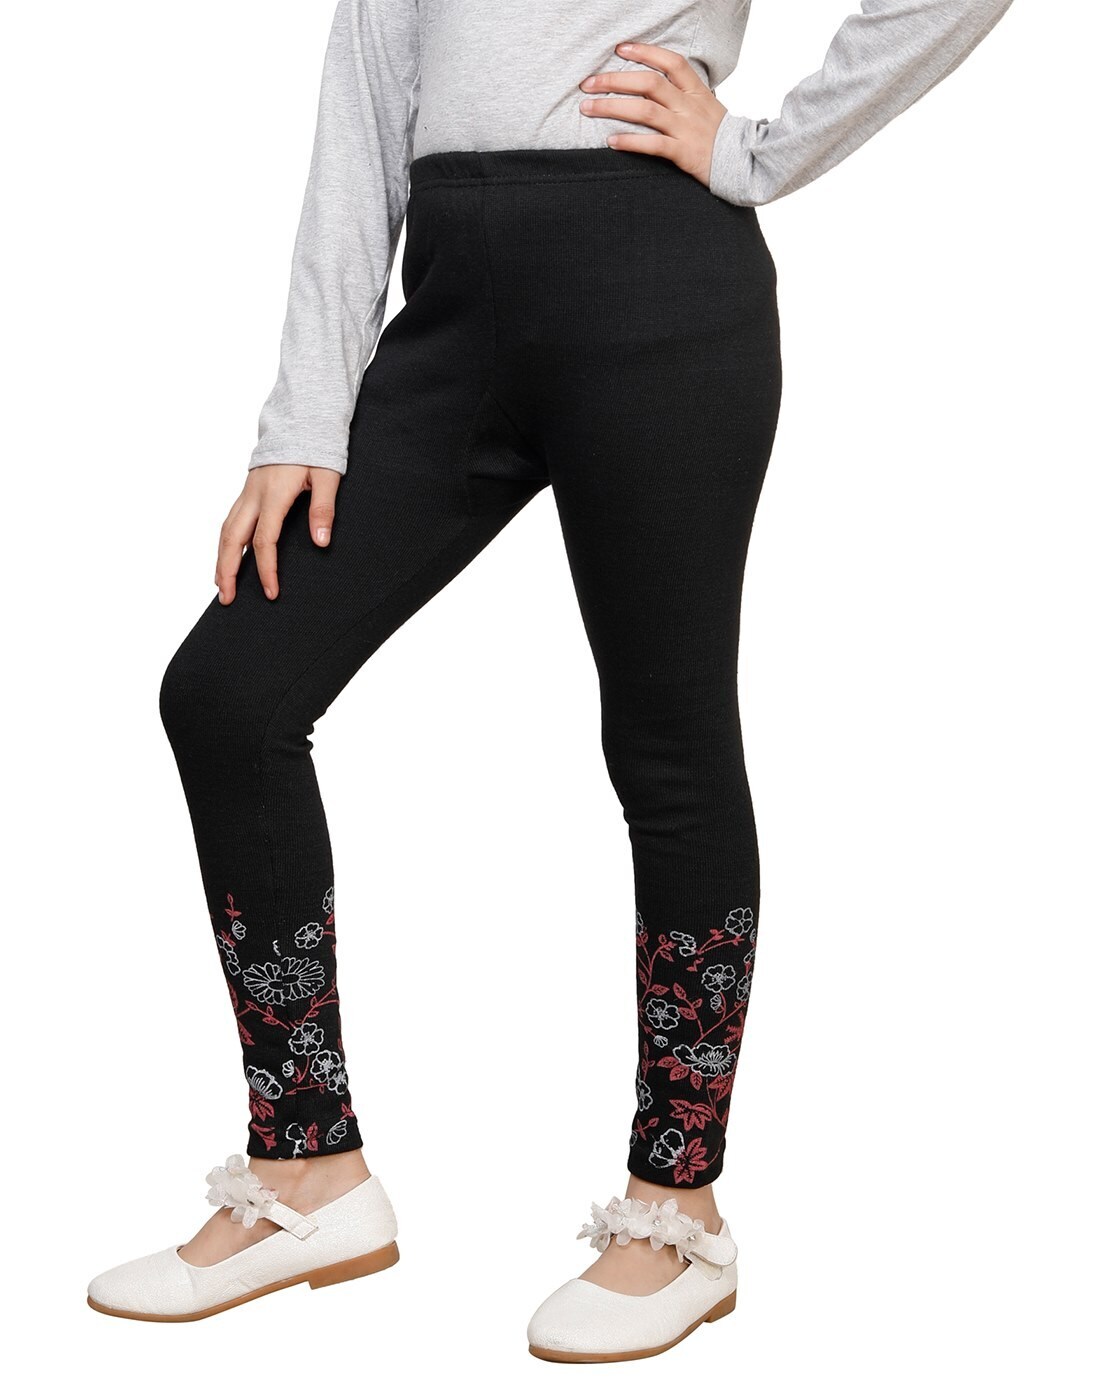 Strawberry Floral Leggings - INAC